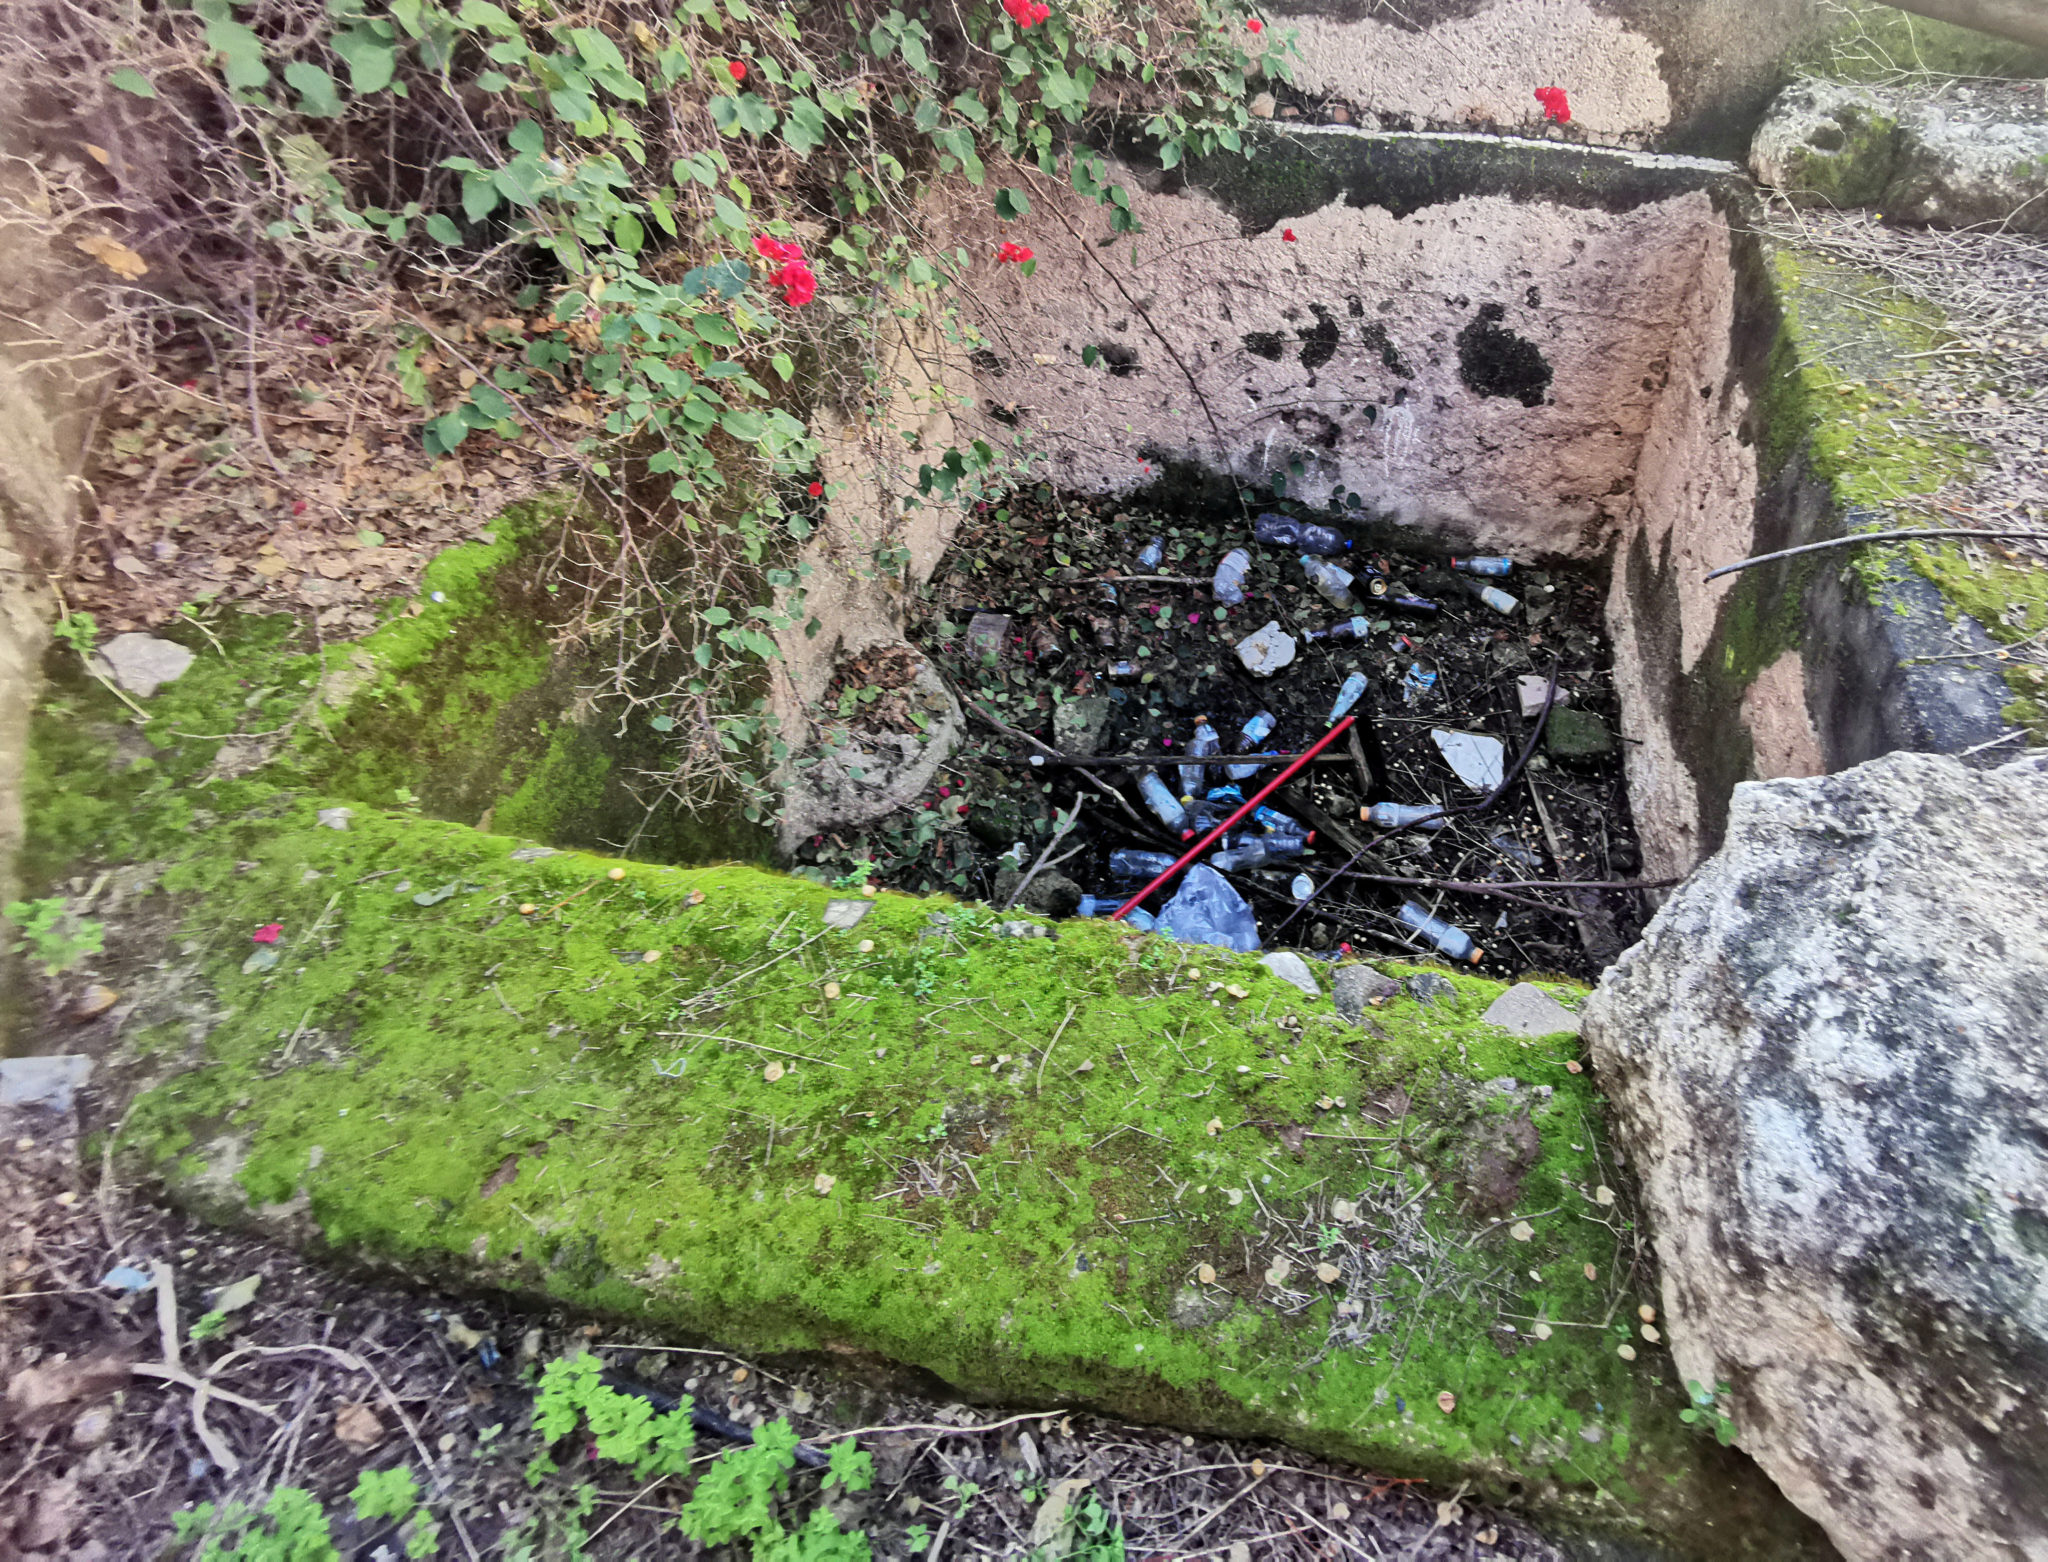 The ruins of an ancient Israeli winepress; a stone vat is visible, which would have held the grapes